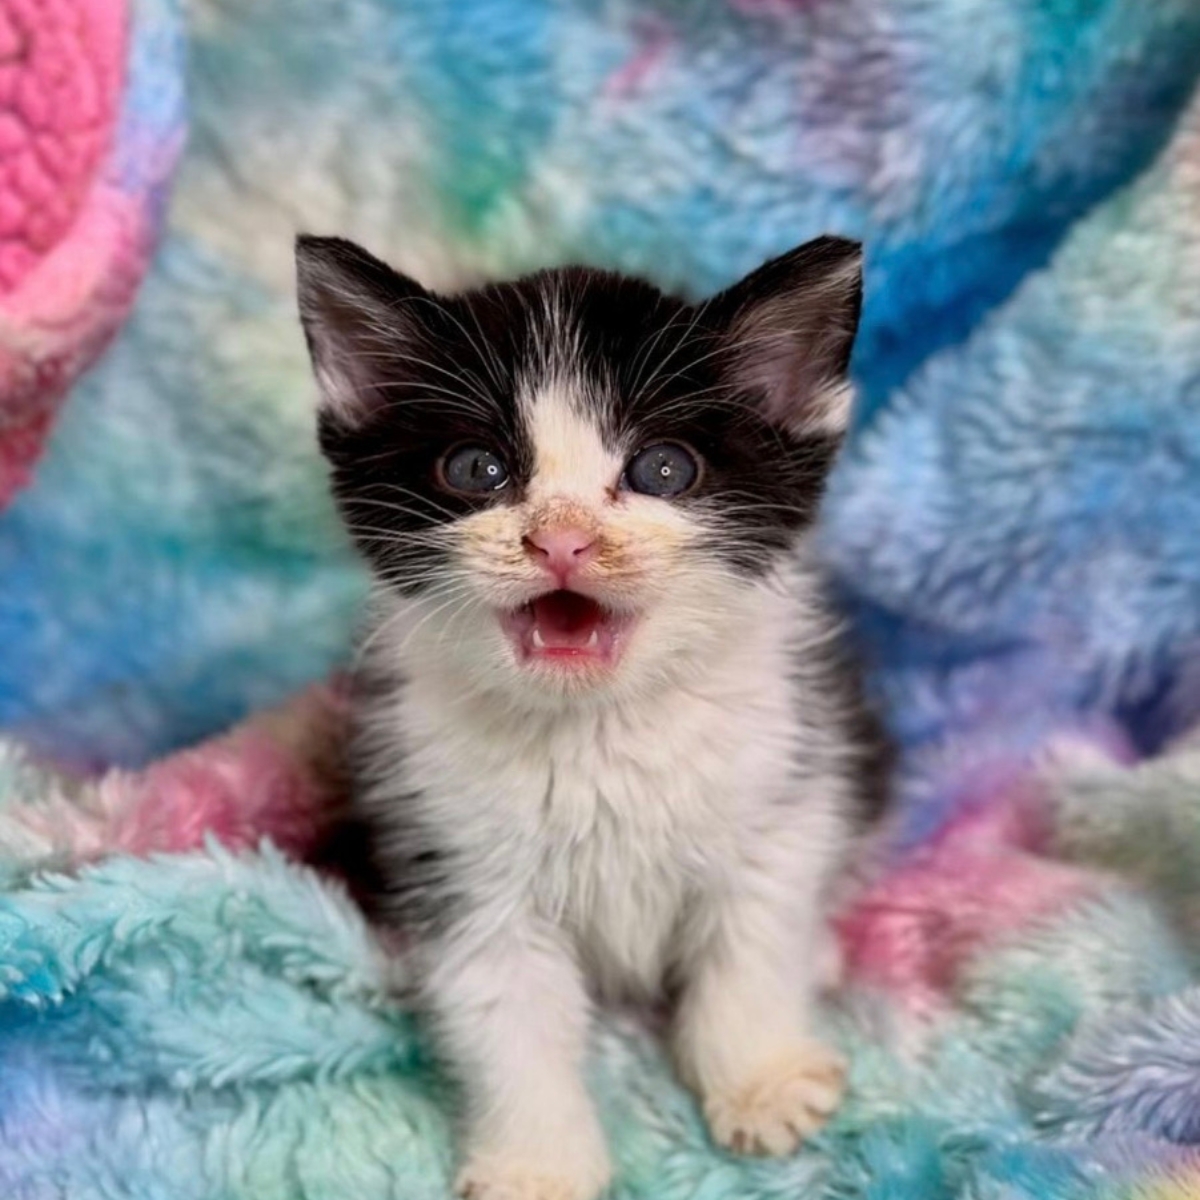 kitten on a colorful blanket